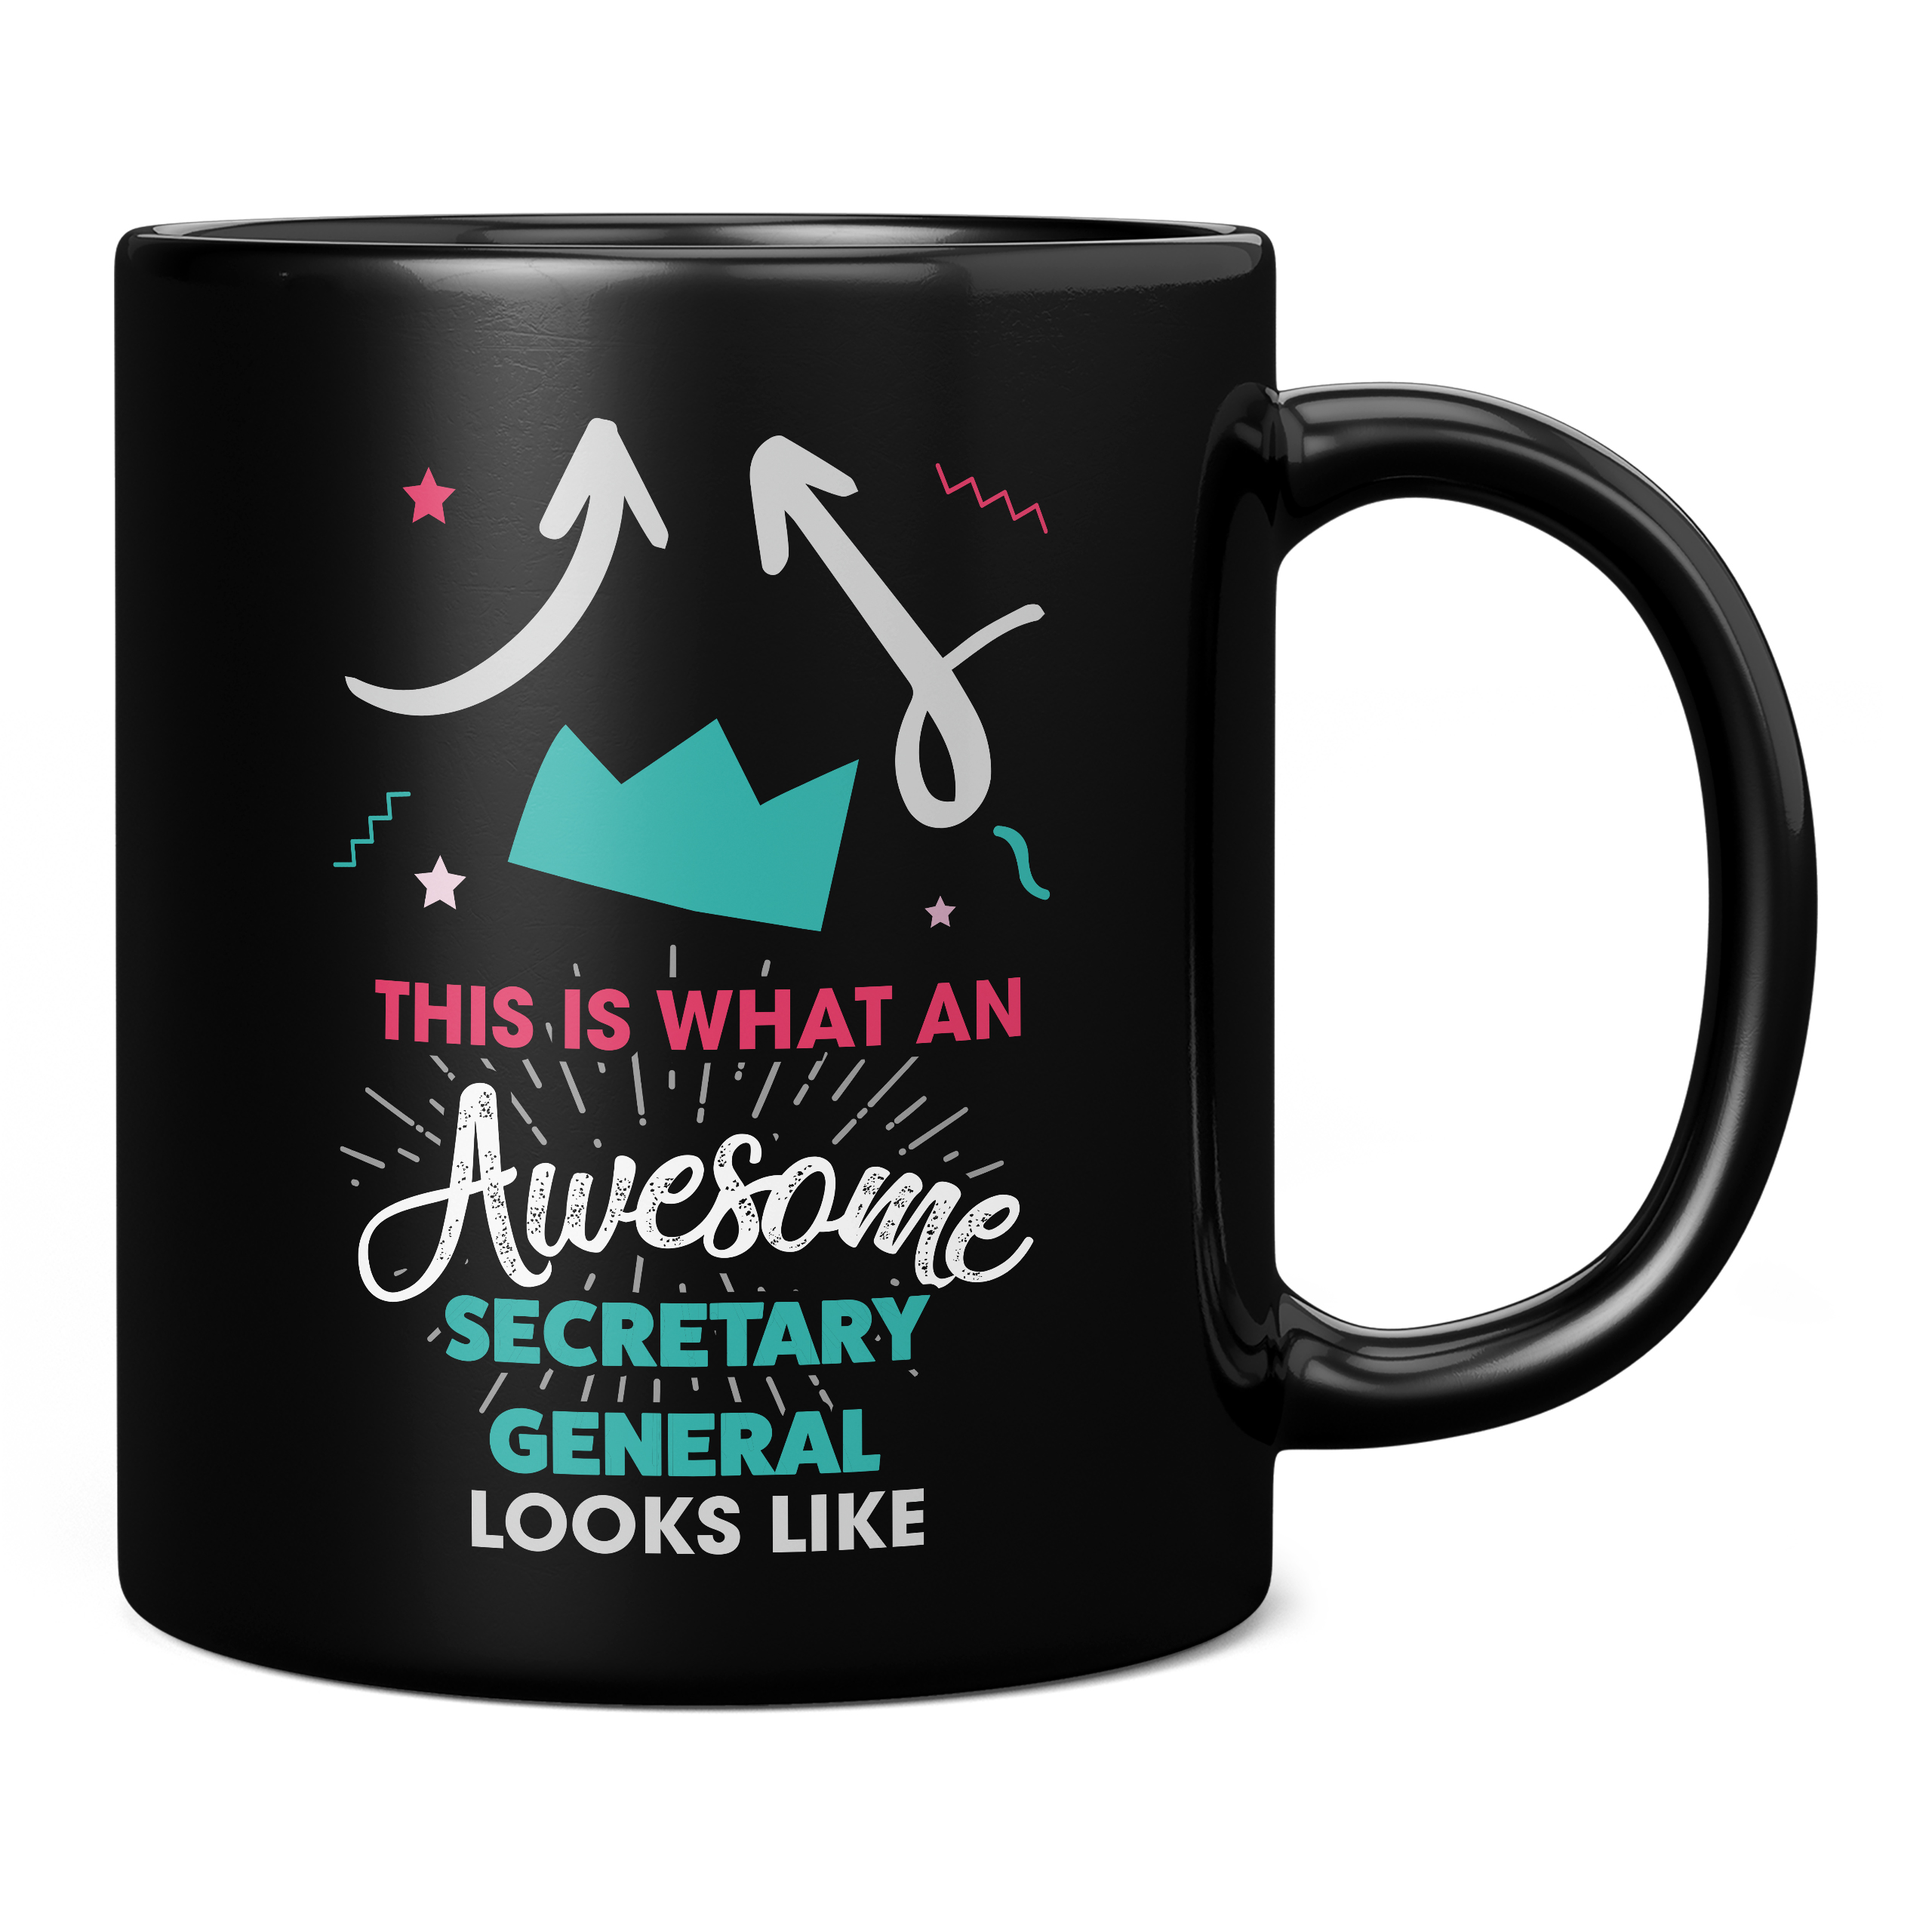 THIS IS WHAT AN AWESOME SECRETARY GENERAL LOOKS LIKE 11OZ NOVELTY MUG